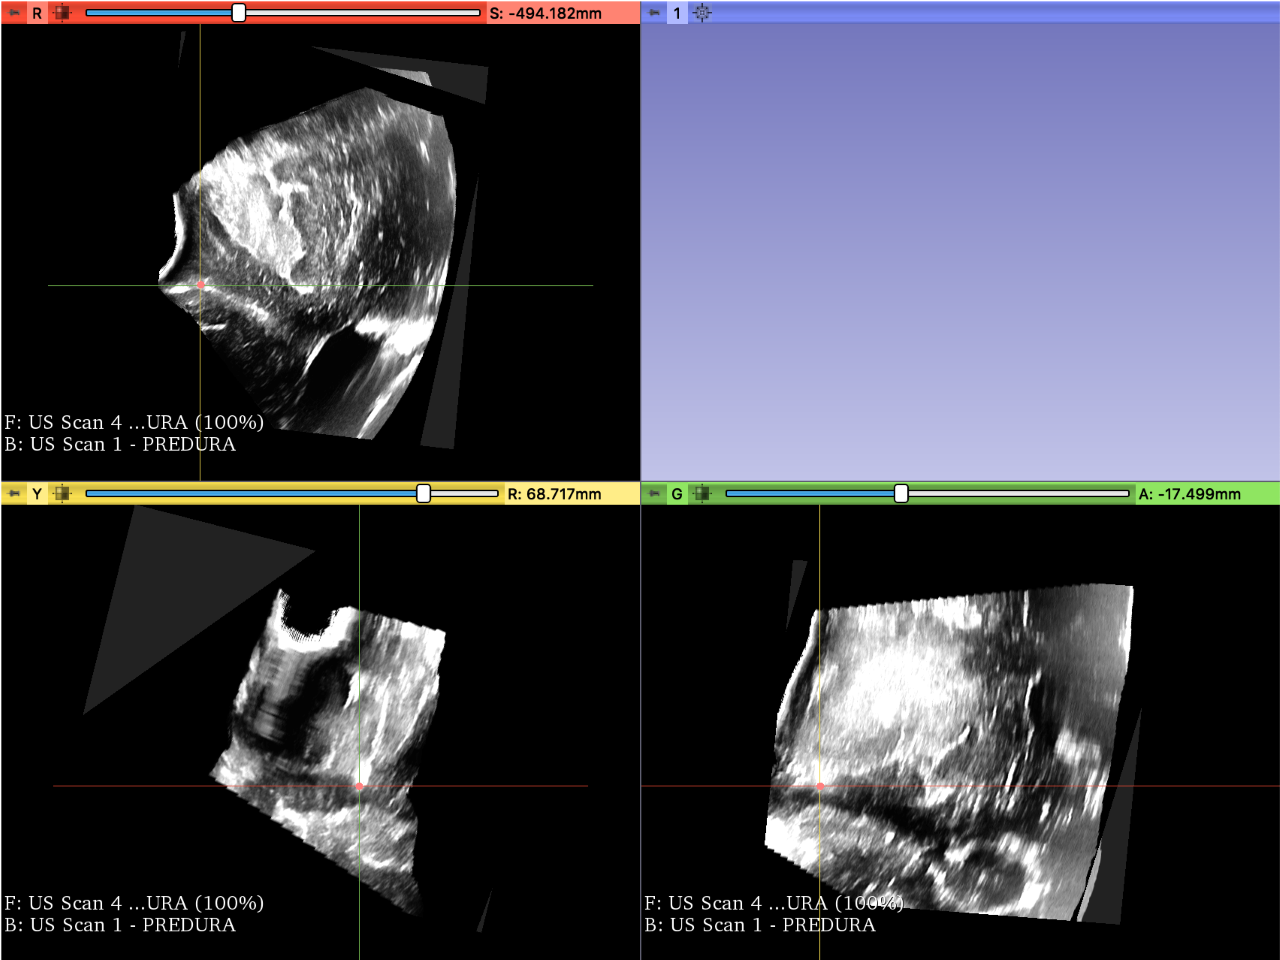 Screenshot of the post-dura ultrasound fiducial located on the sulcus